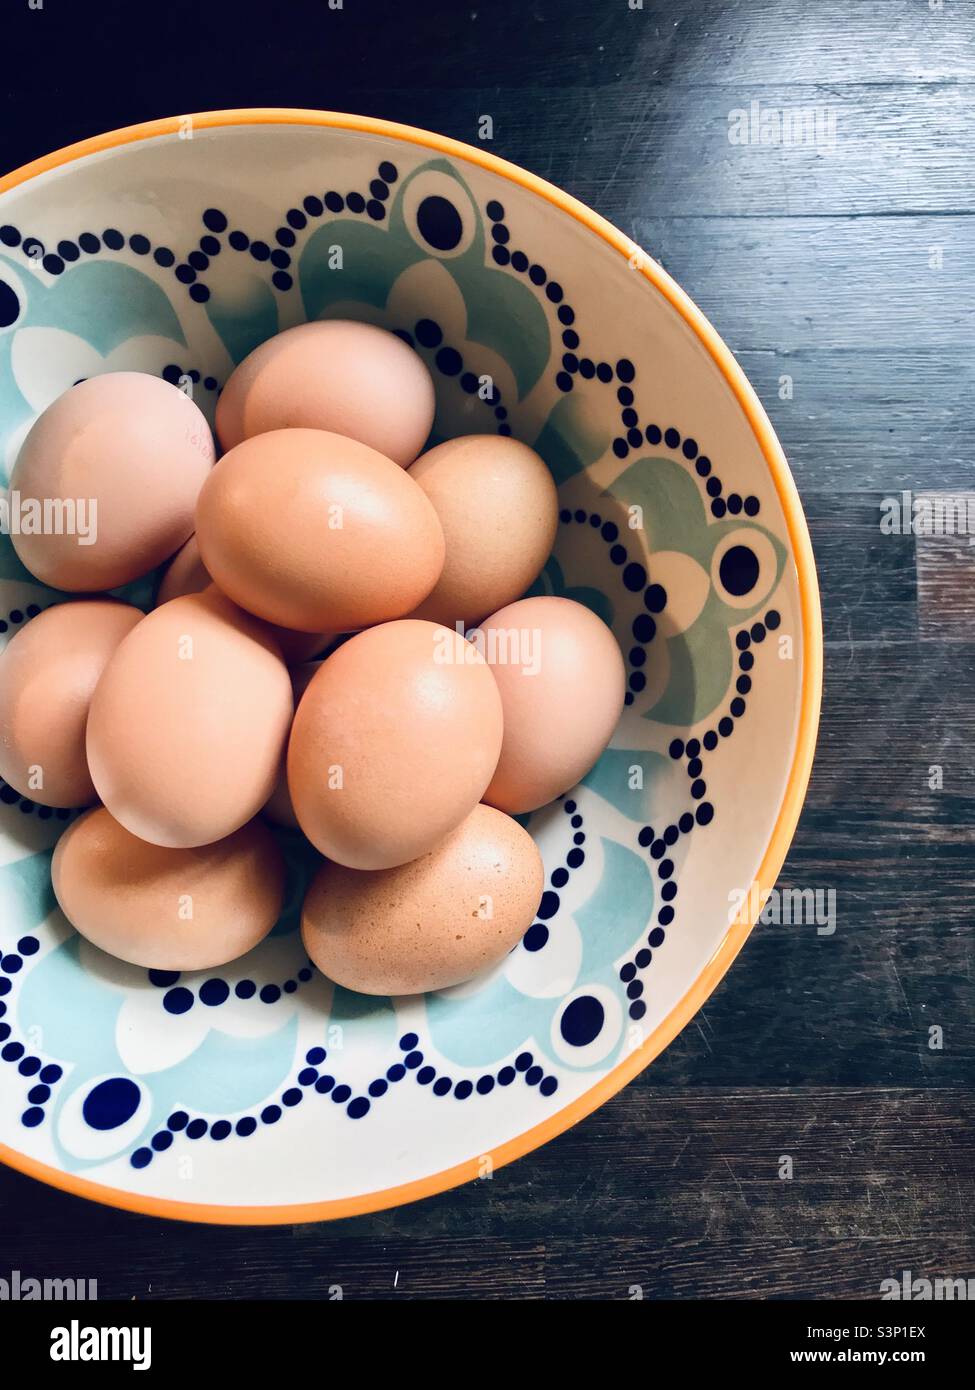 Decorative bowl filled with eggs Stock Photo